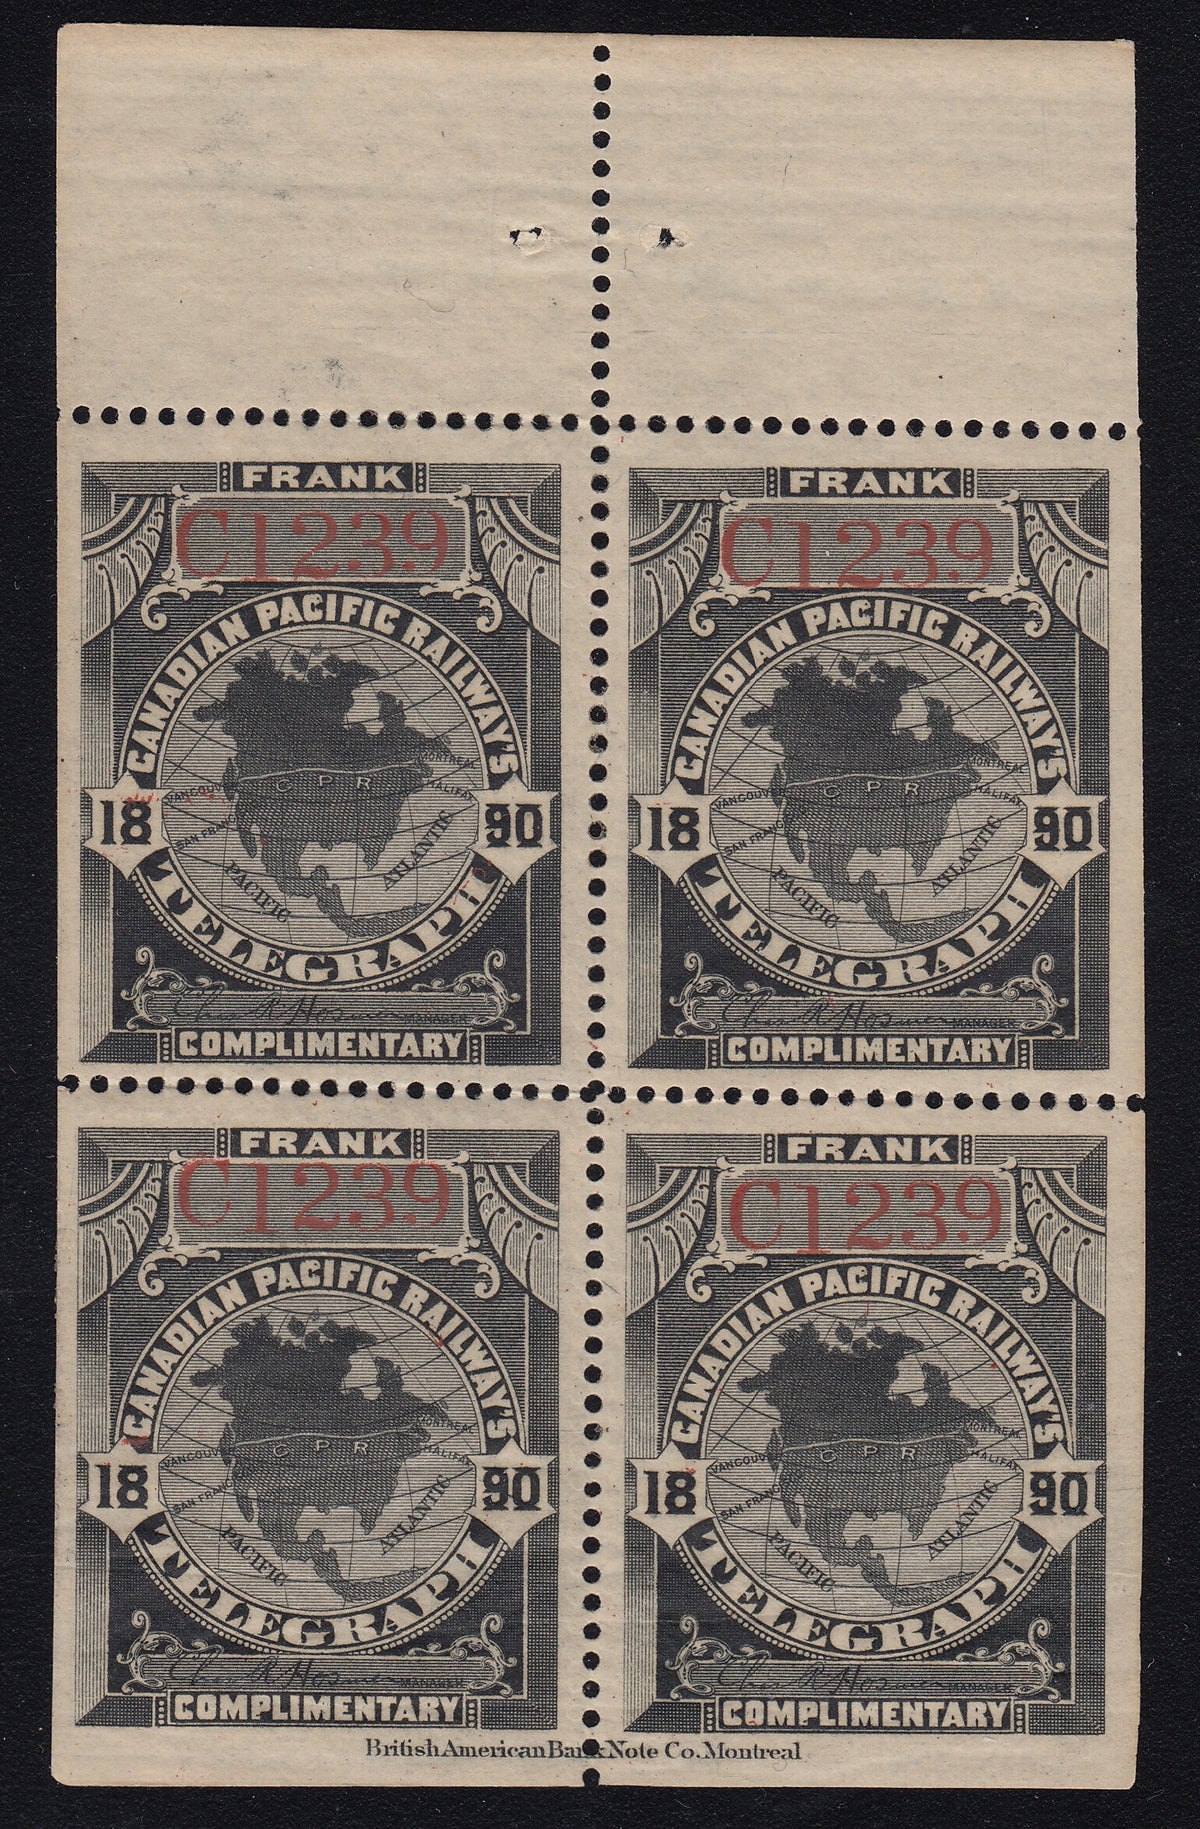 0003CP1712 - TCP3 - Mint Booklet Pane